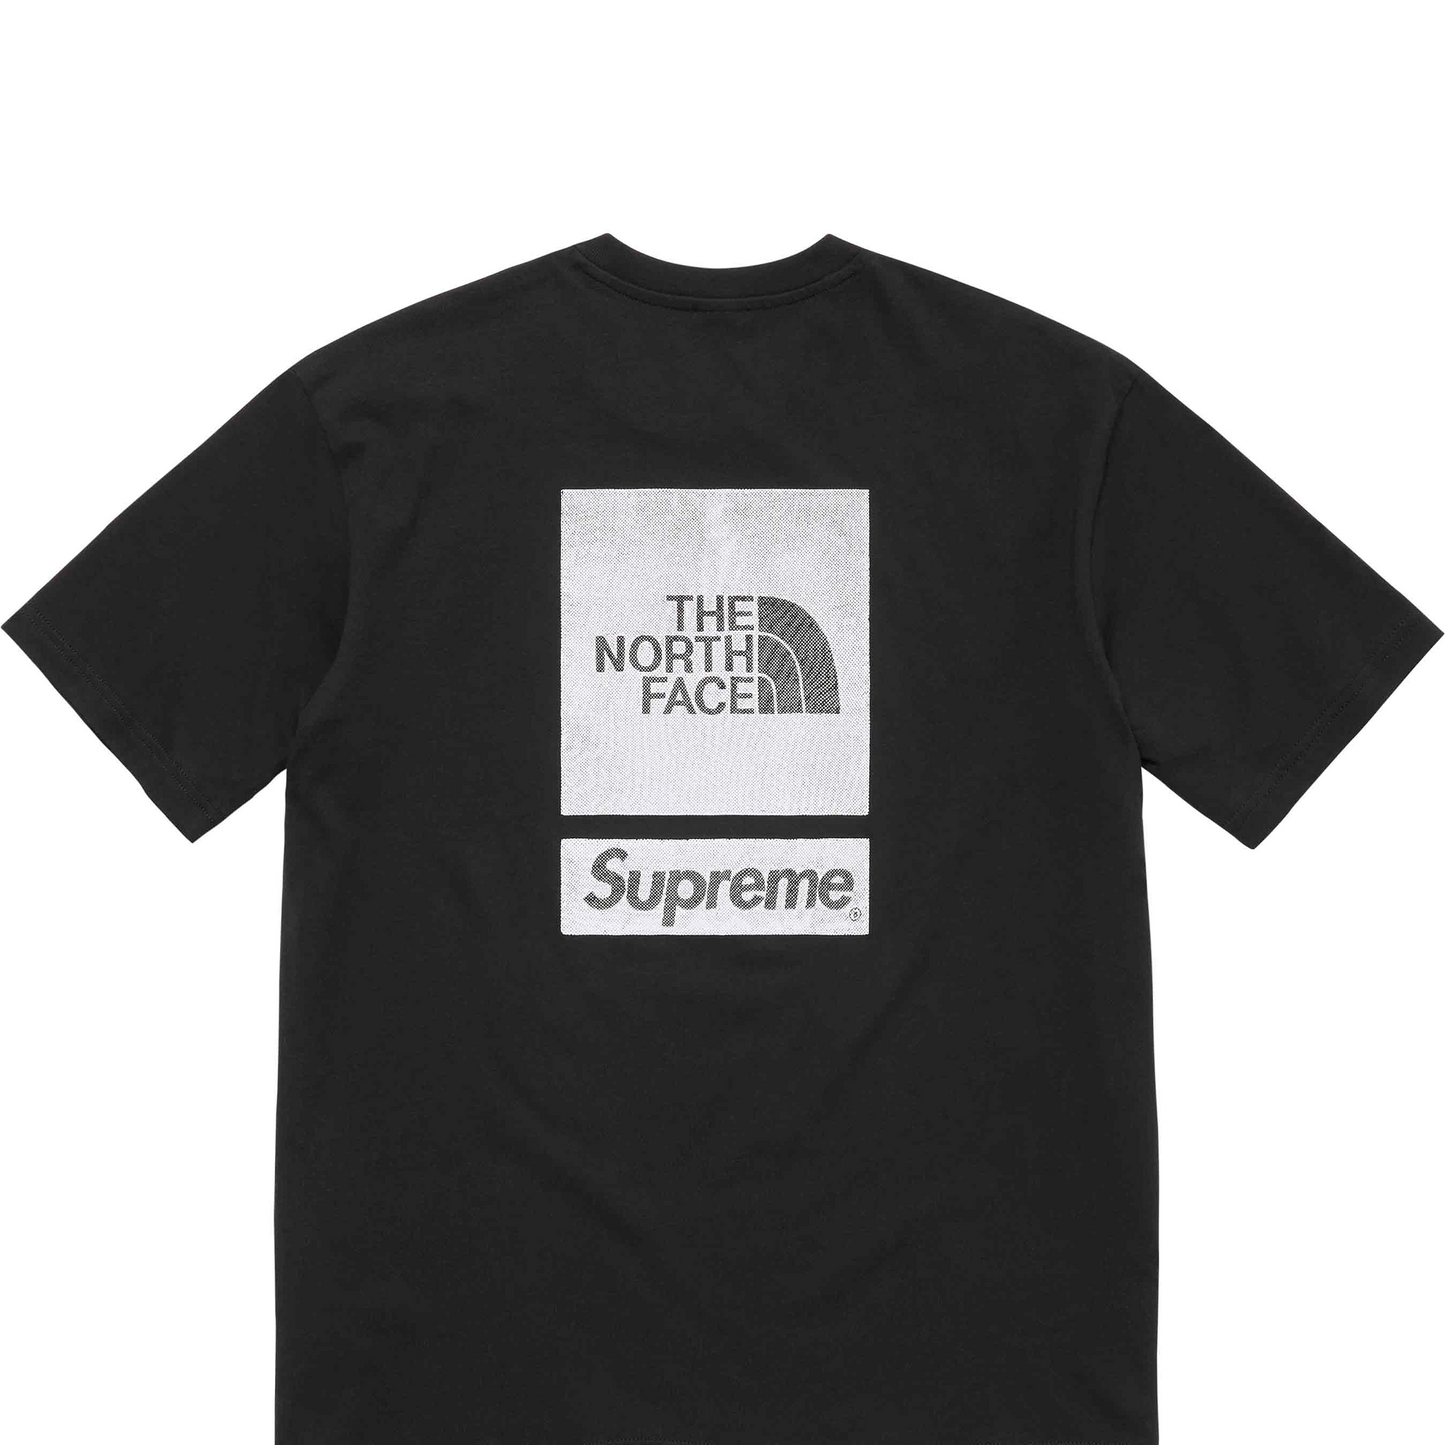 Supreme x The North Face Short Sleeve Tee Black (SS24)